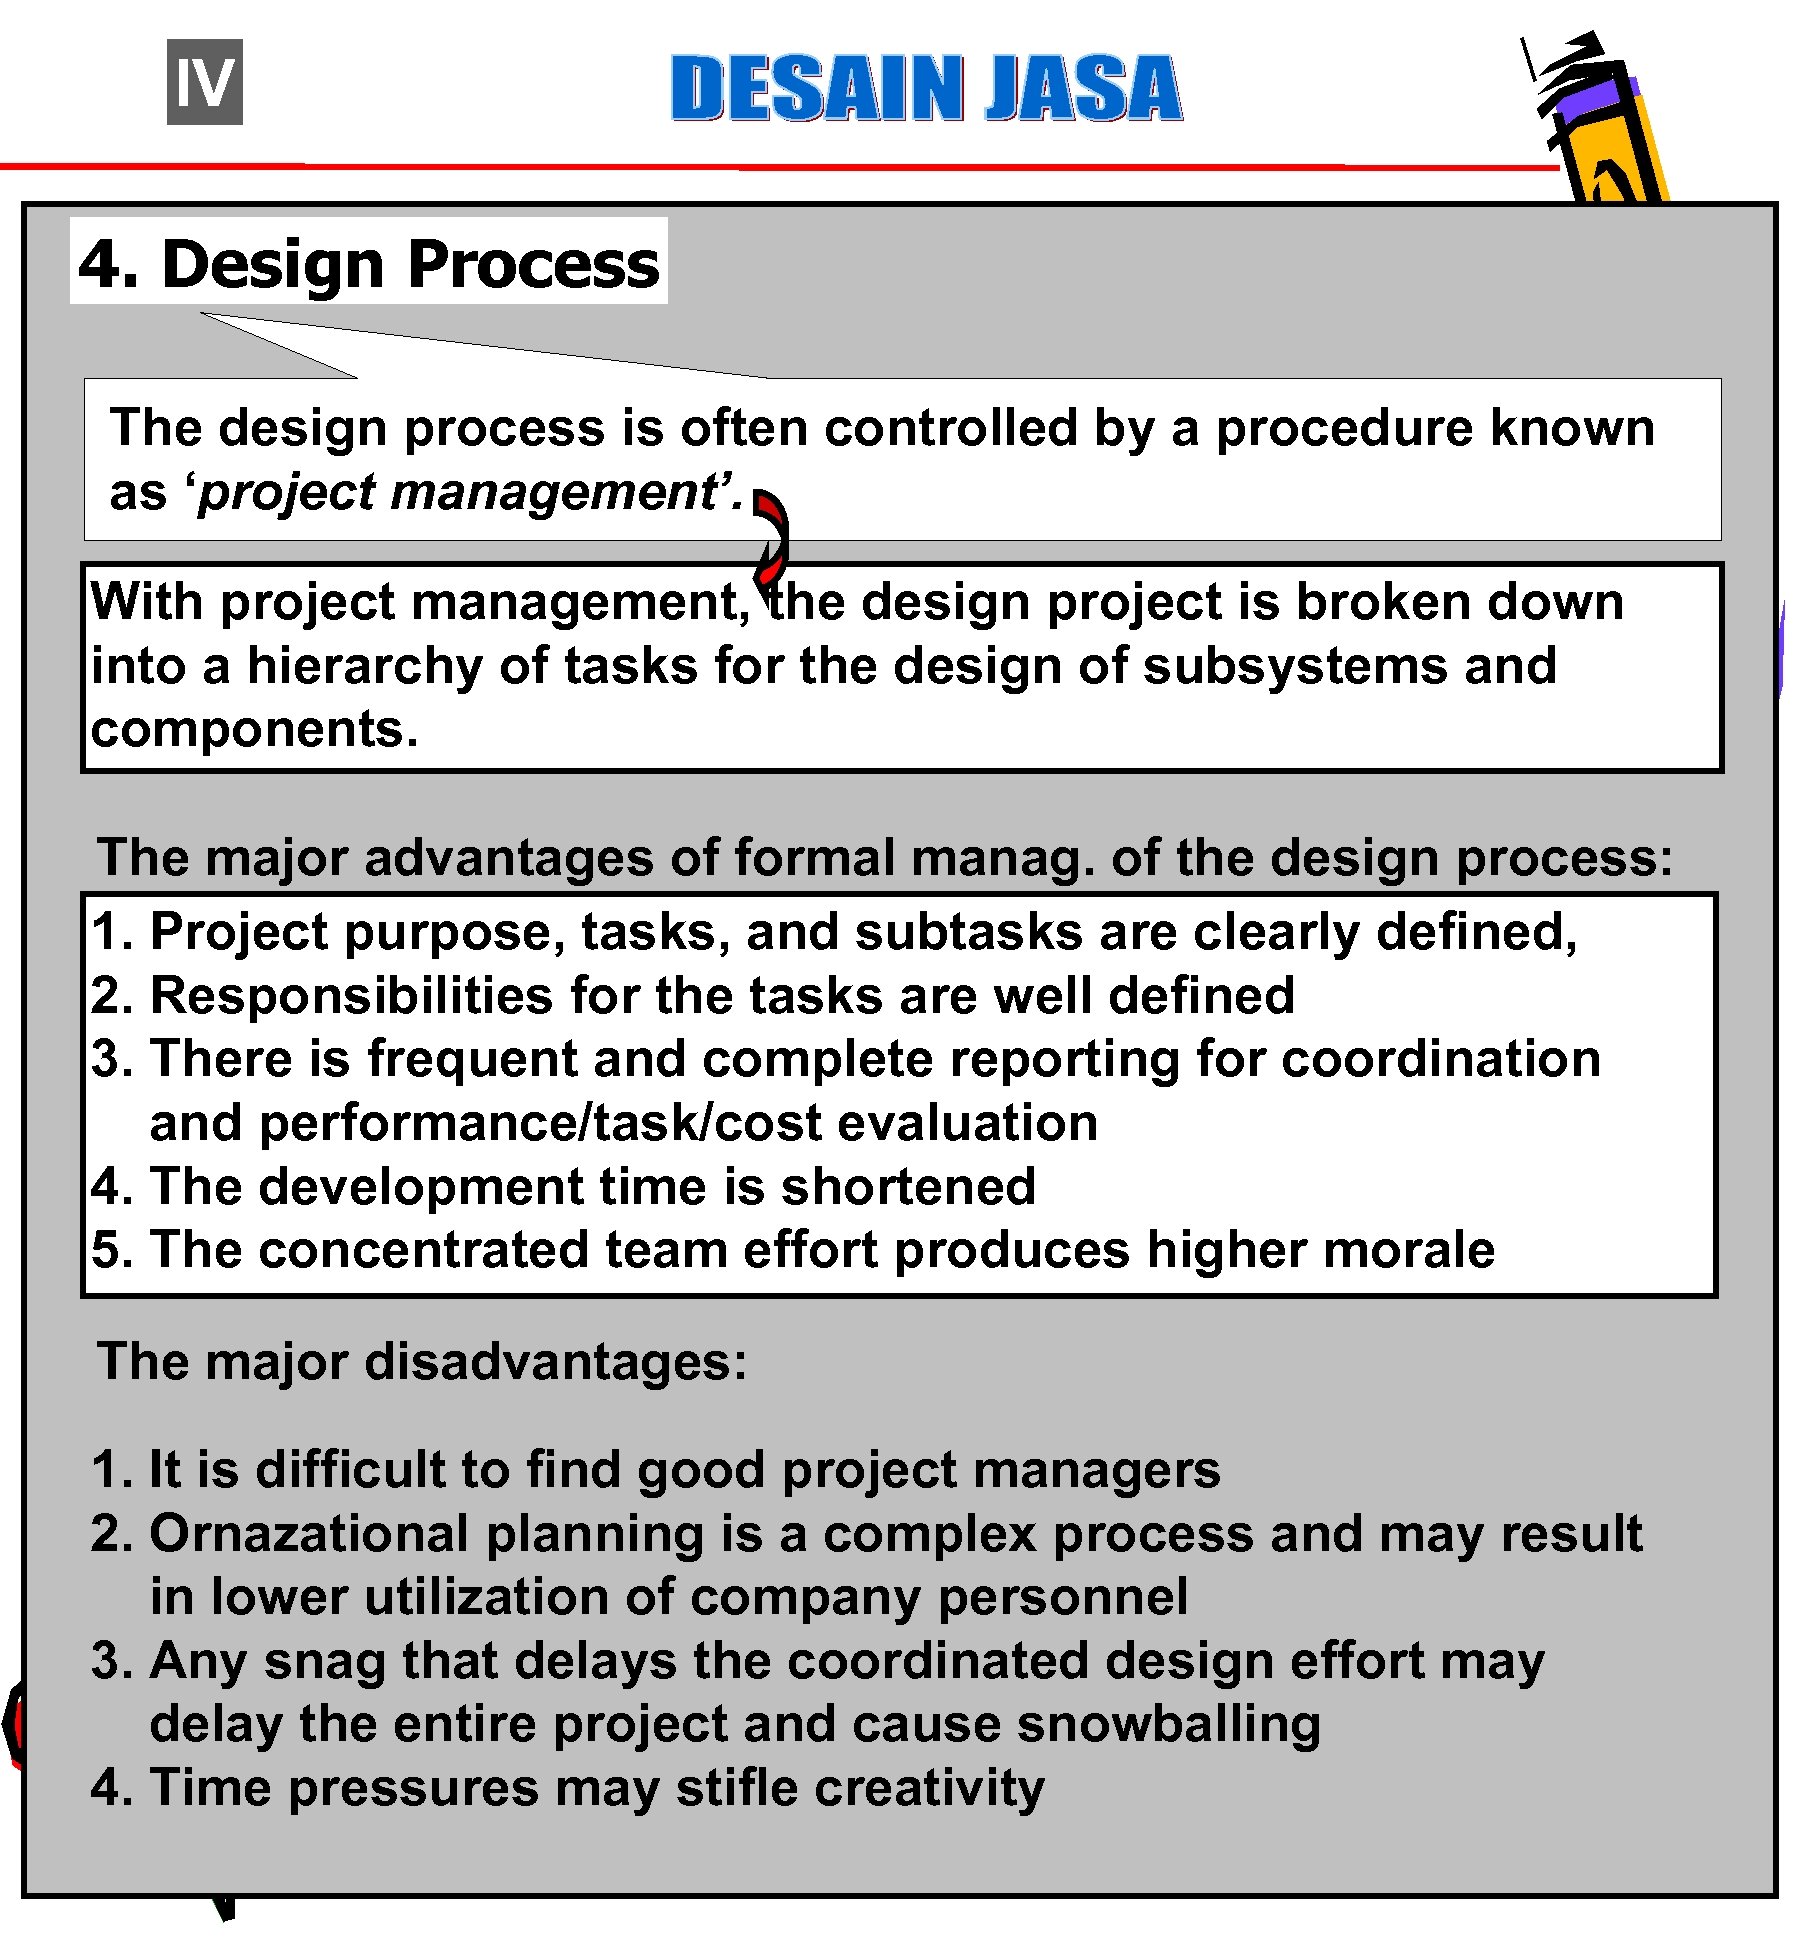 IV 4. Design Process The design process is often controlled by a procedure known